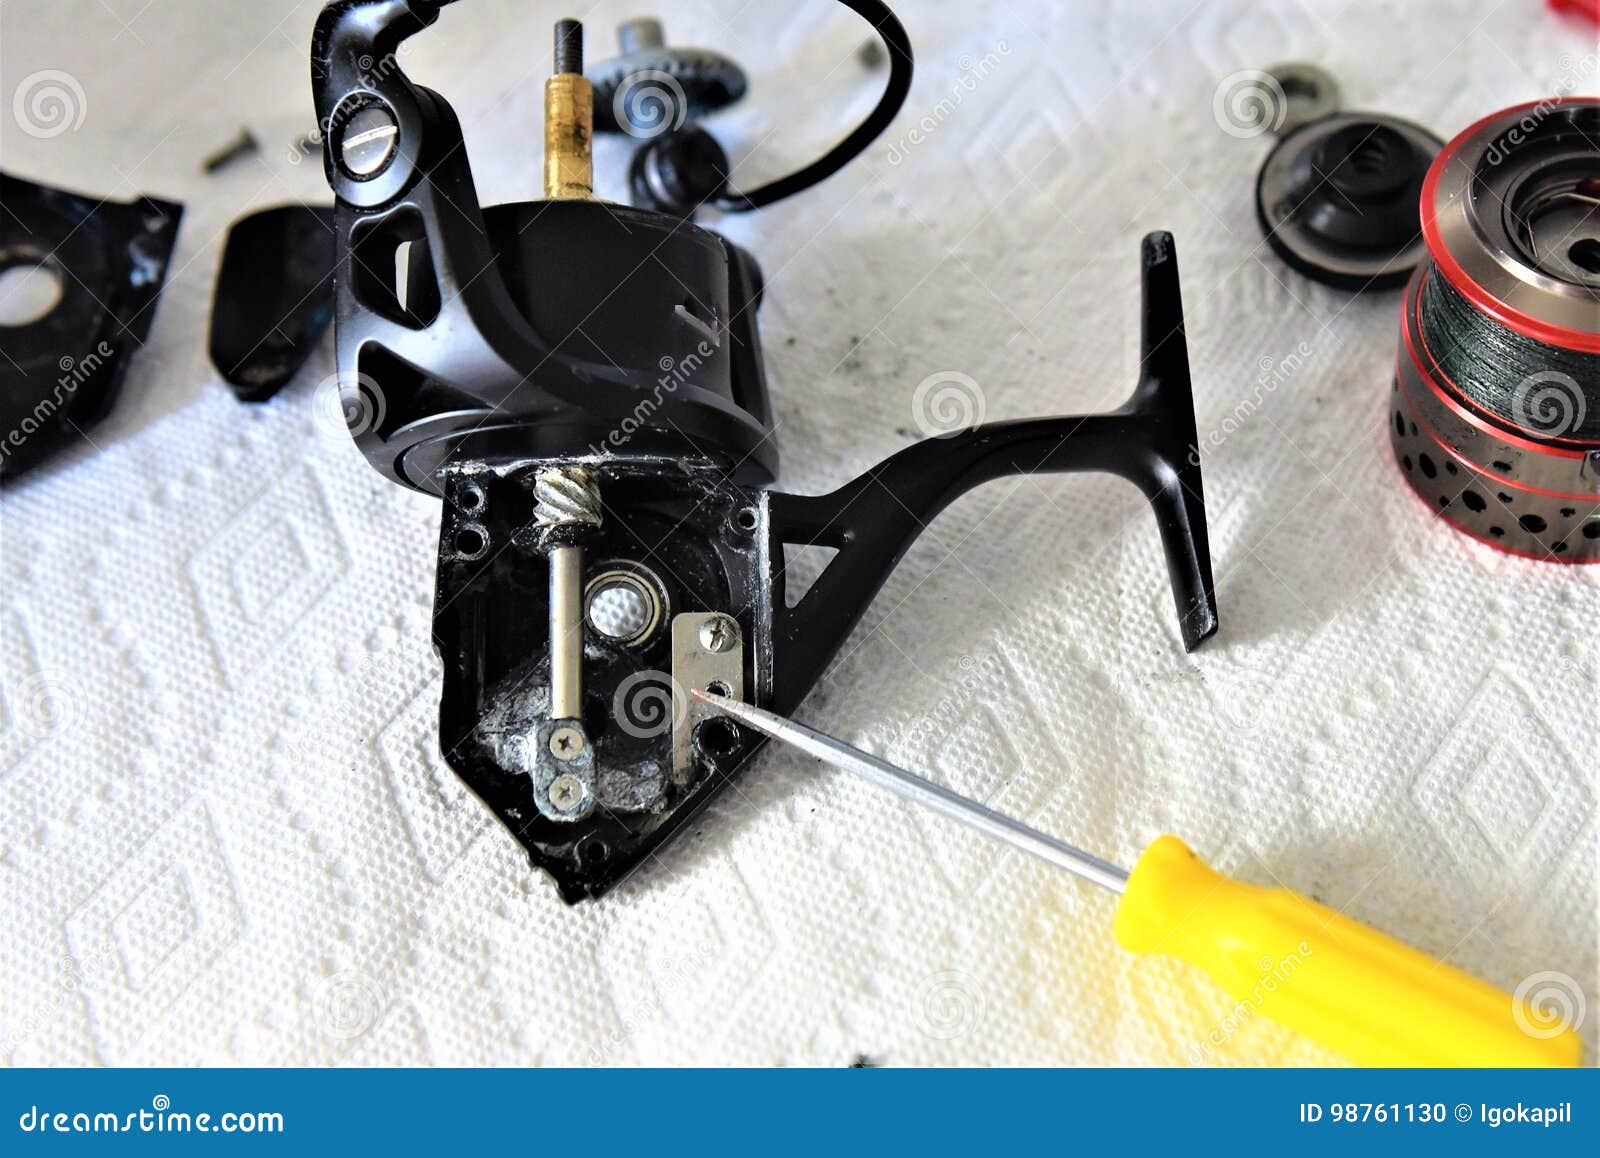 https://thumbs.dreamstime.com/z/fishing-reel-disassembled-parts-cleaning-every-fisherman-angler-its-important-not-what-kind-rod-98761130.jpg